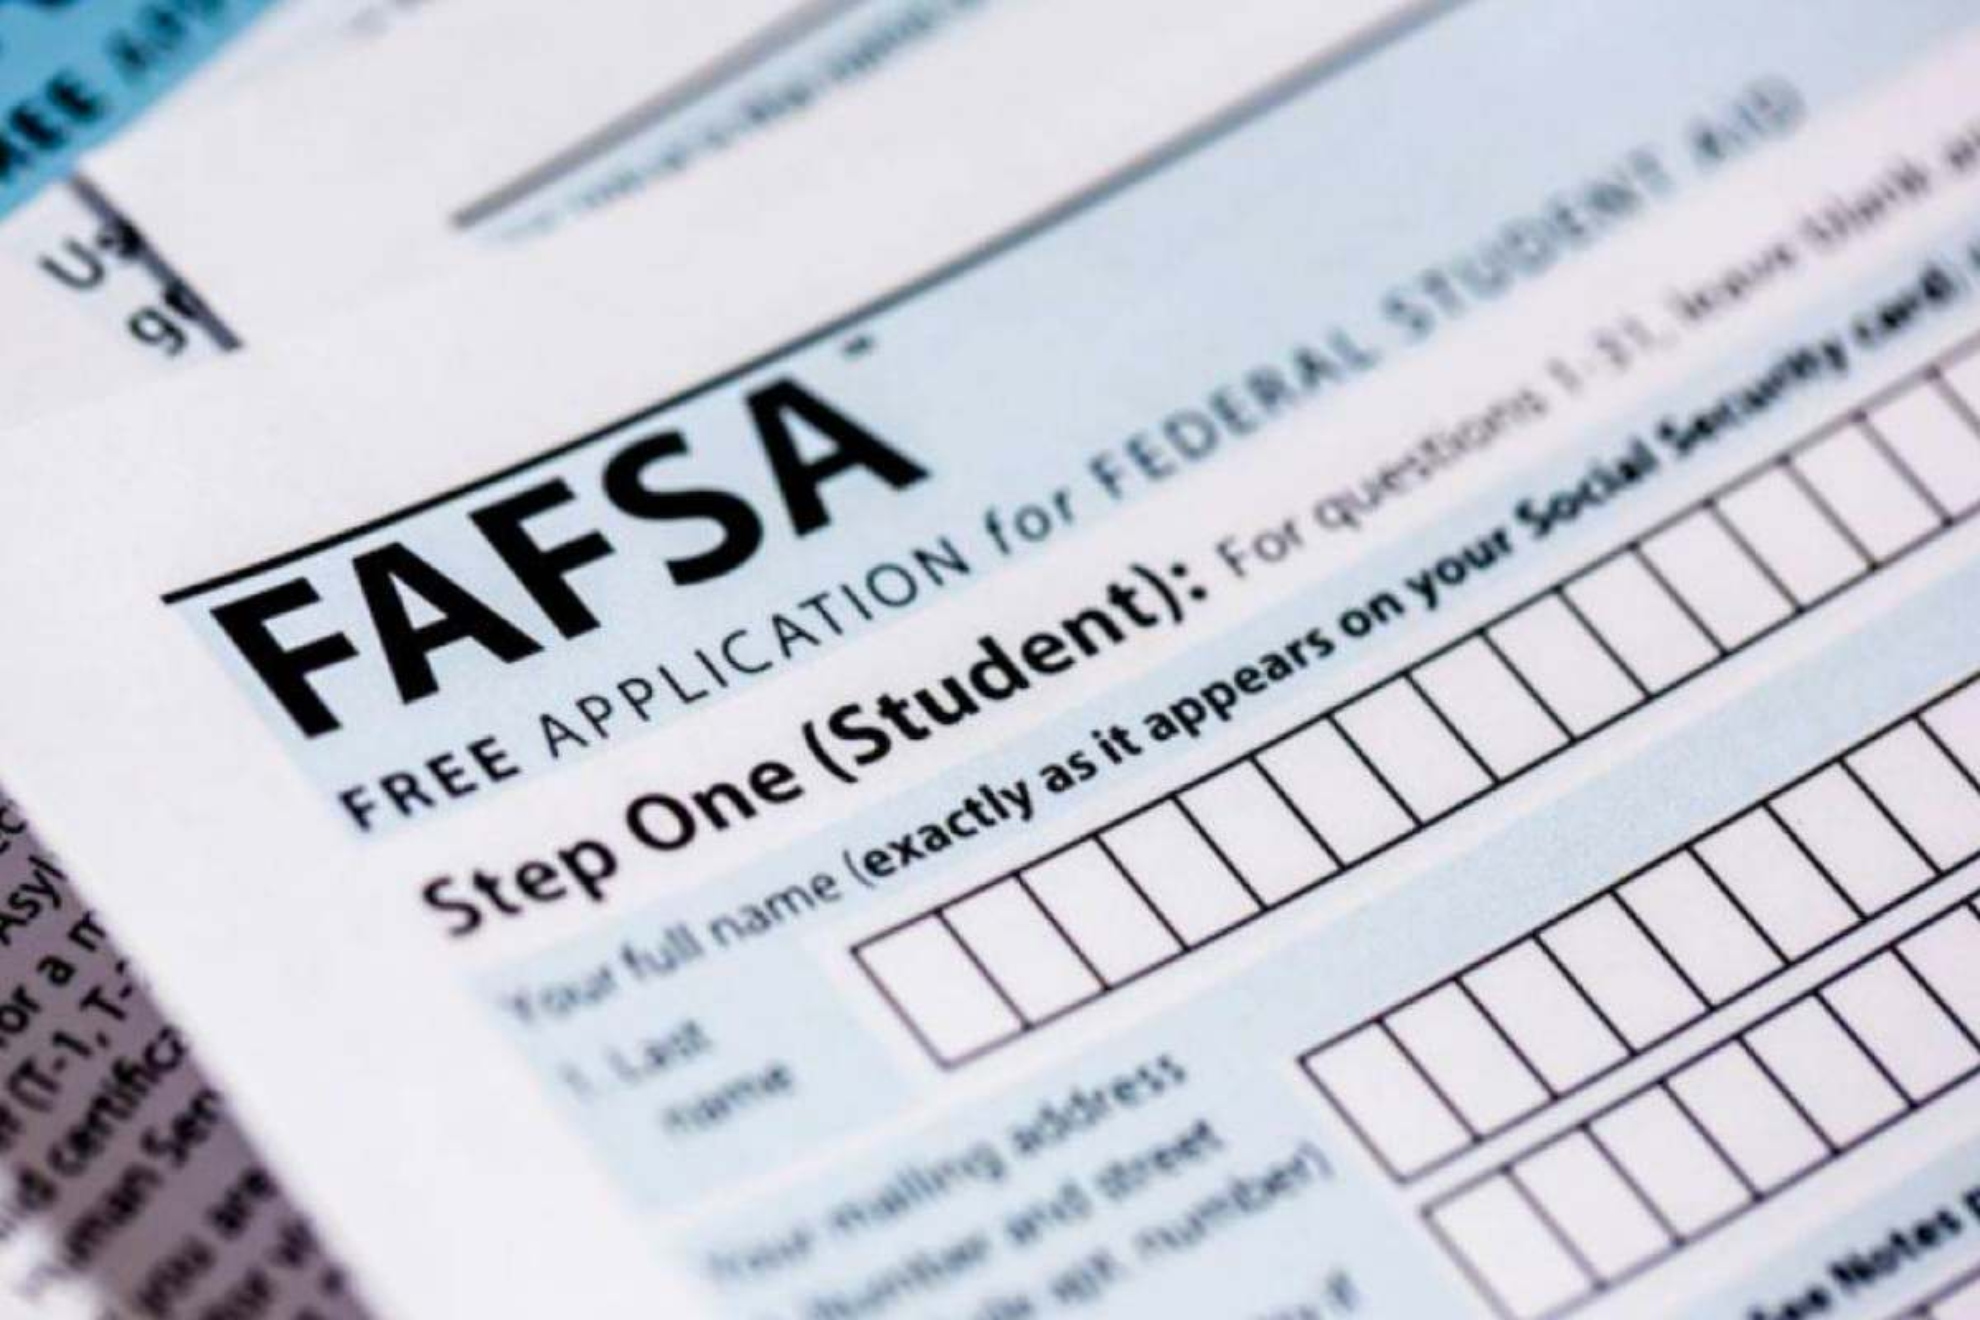 AFSA Application: A comprehensive step-by-step guide to completing yours successfully